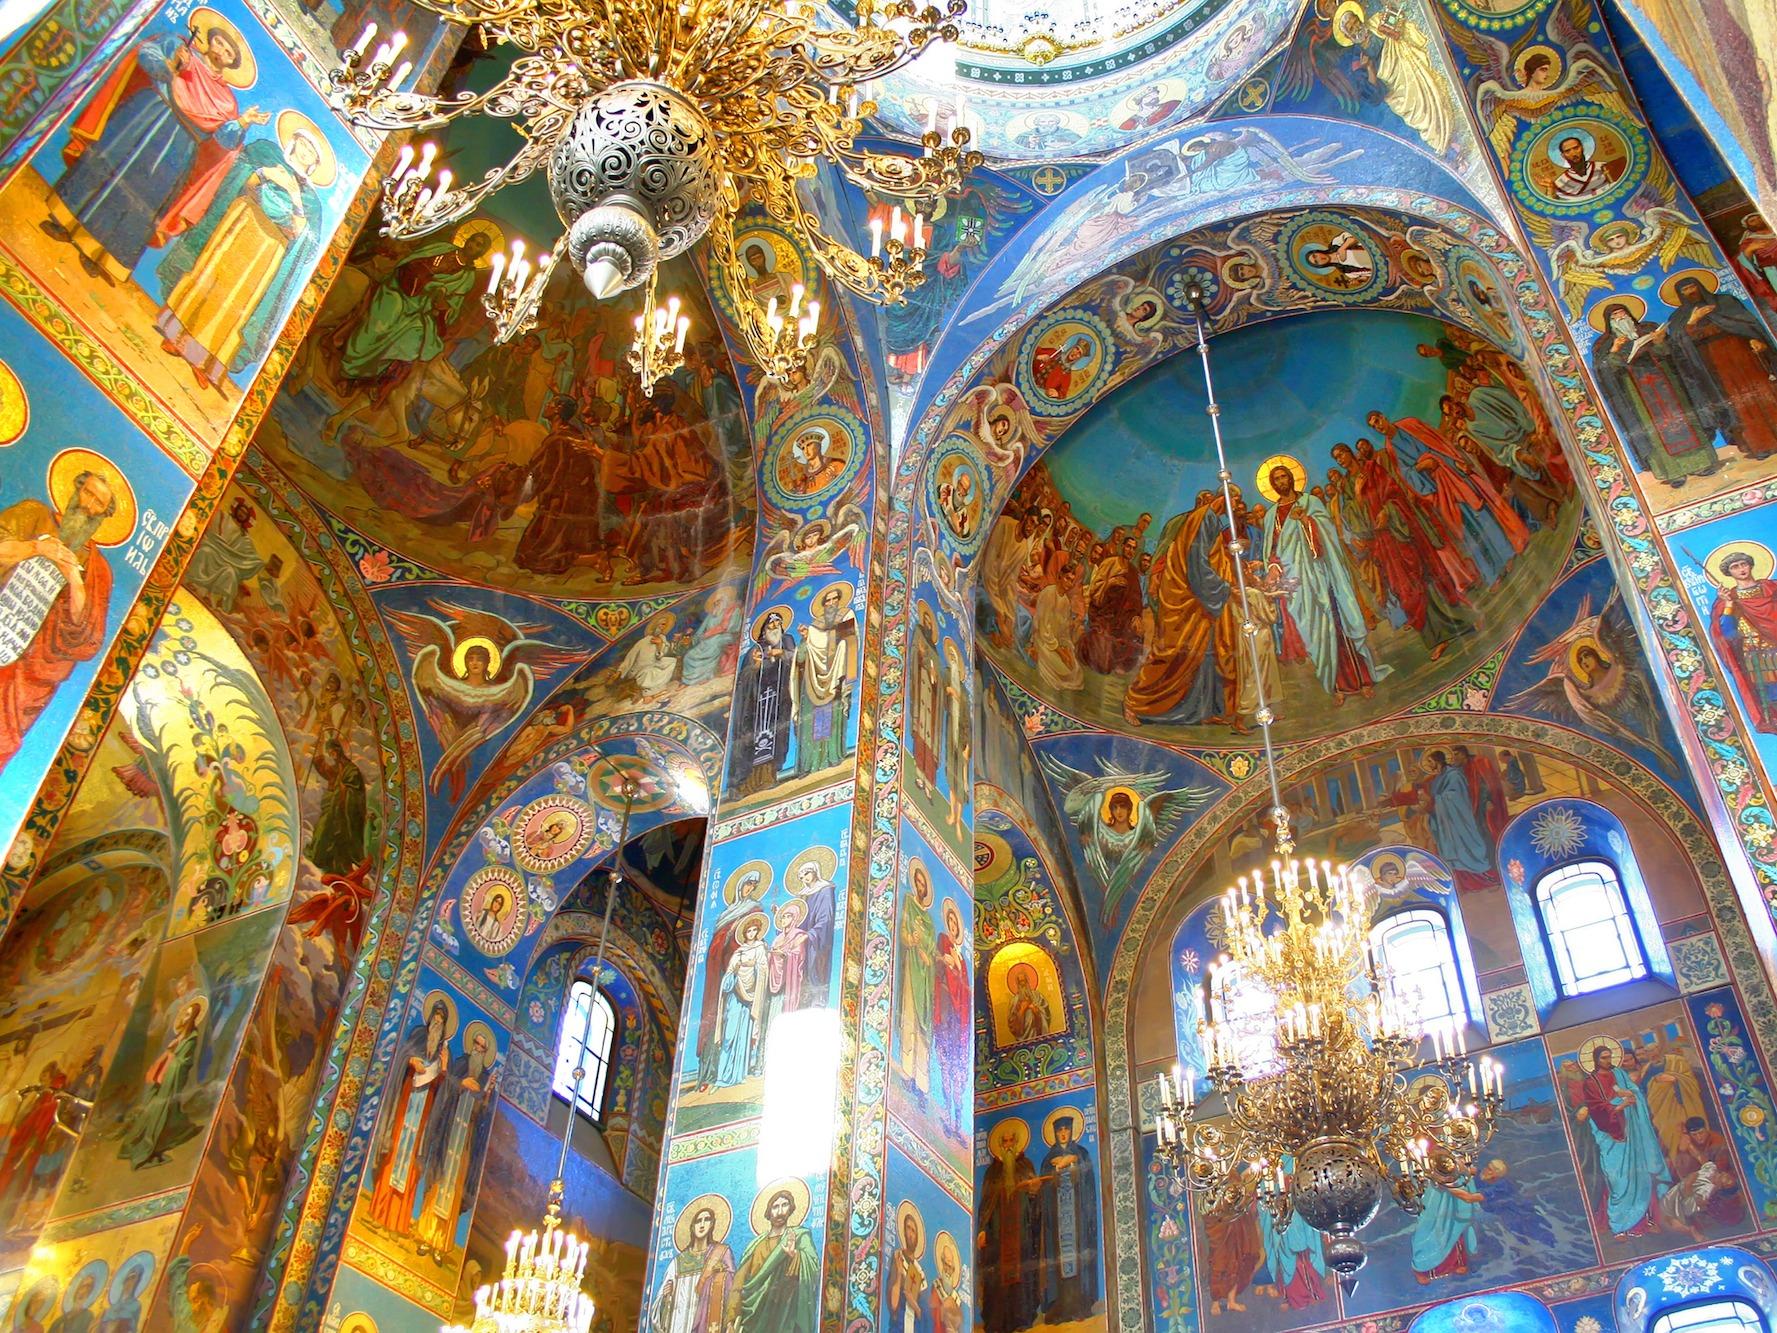 http://www.businessinsider.in/photo/49433641/50-places-everyone-should-visit-in-europe/Marvel-at-the-ornate-interior-of-the-Church-of-the-Savior-on-Spilled-Blood-in-St-Petersburg-Russia-which-is-covered-in-colorful-mosaics-.jpg